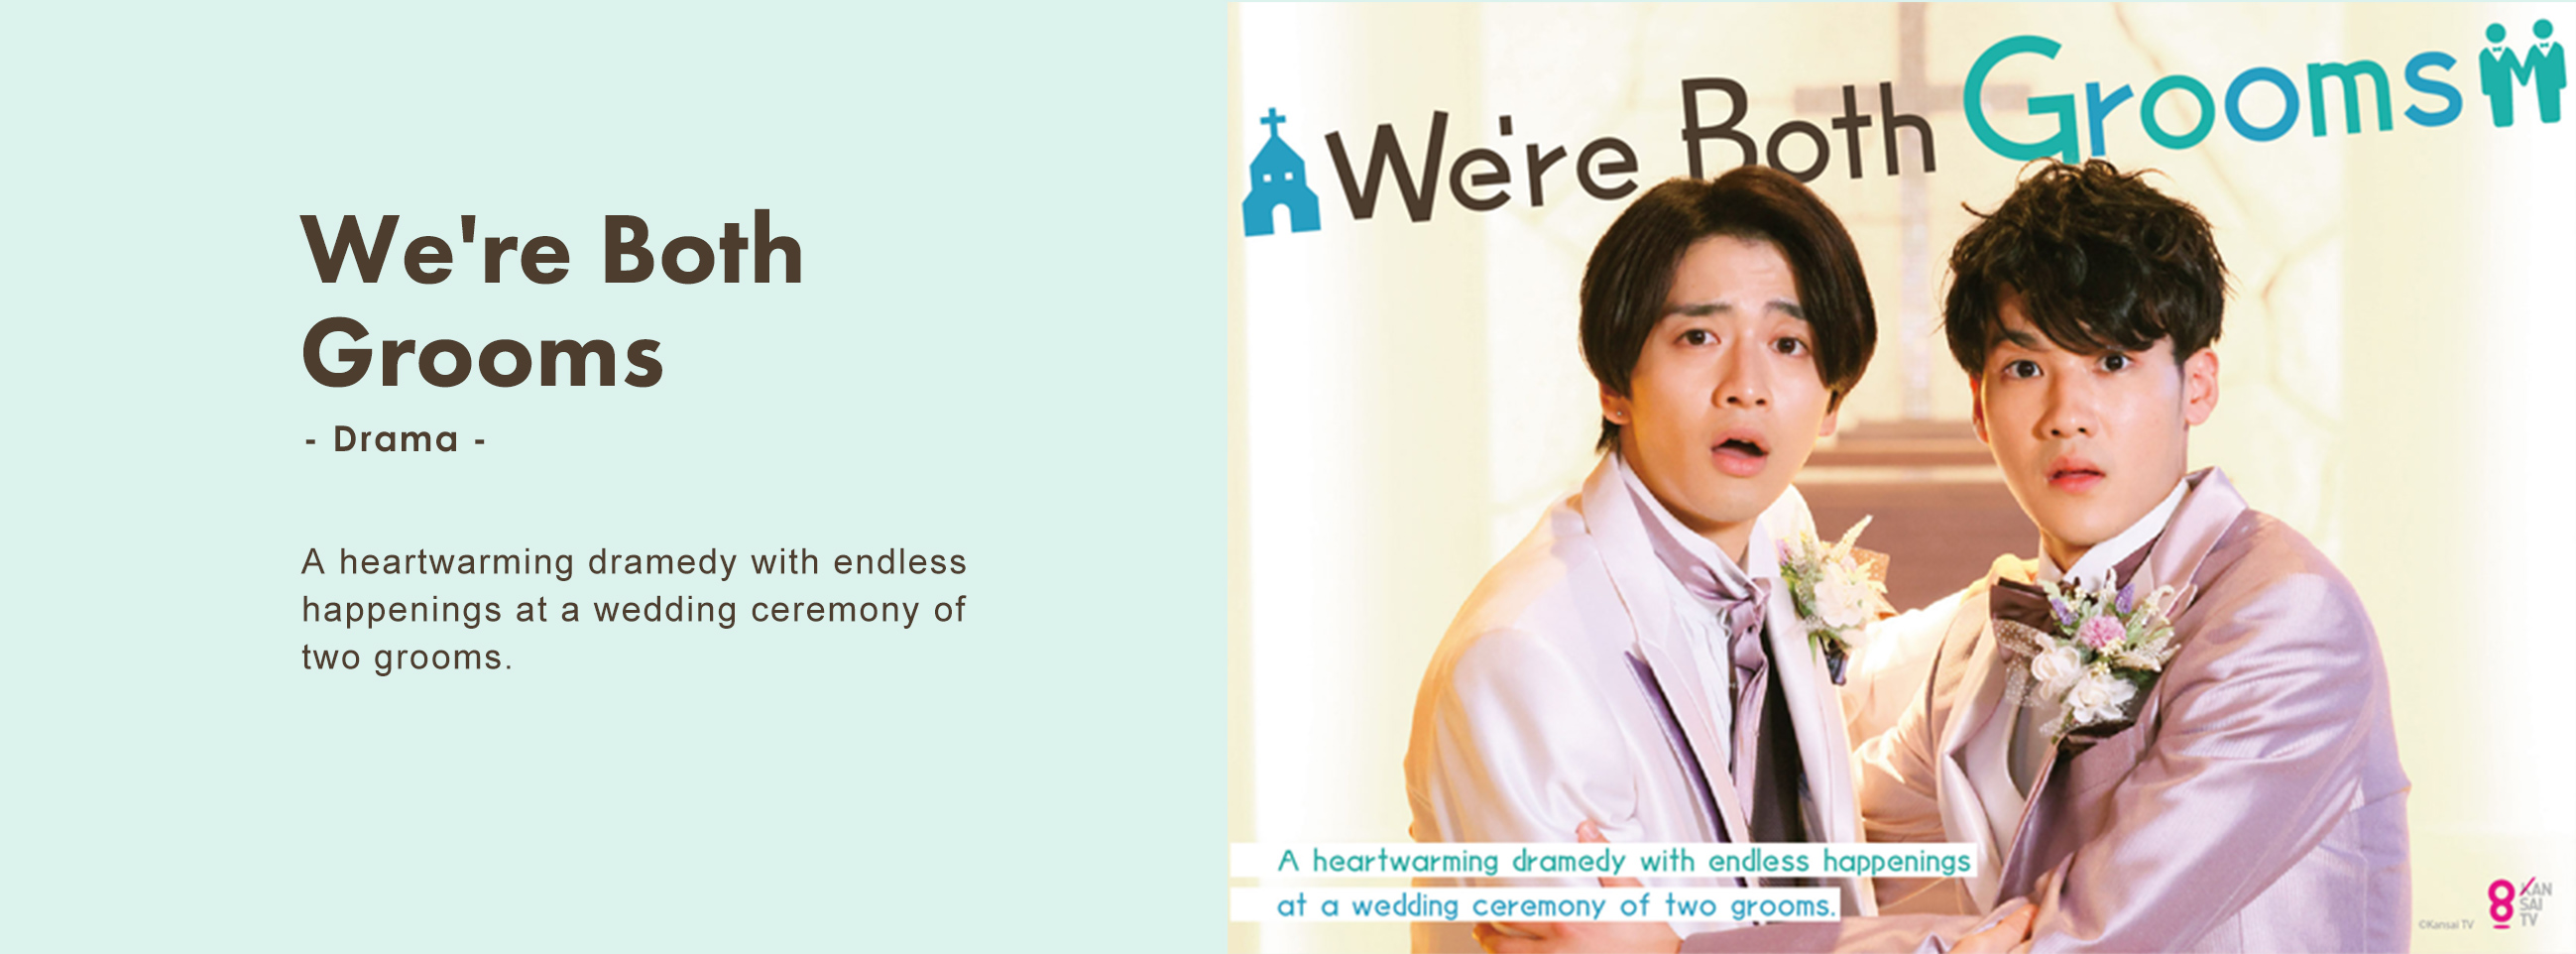 A heartwarming dramedy with endless happenings at a wedding ceremony of two grooms.